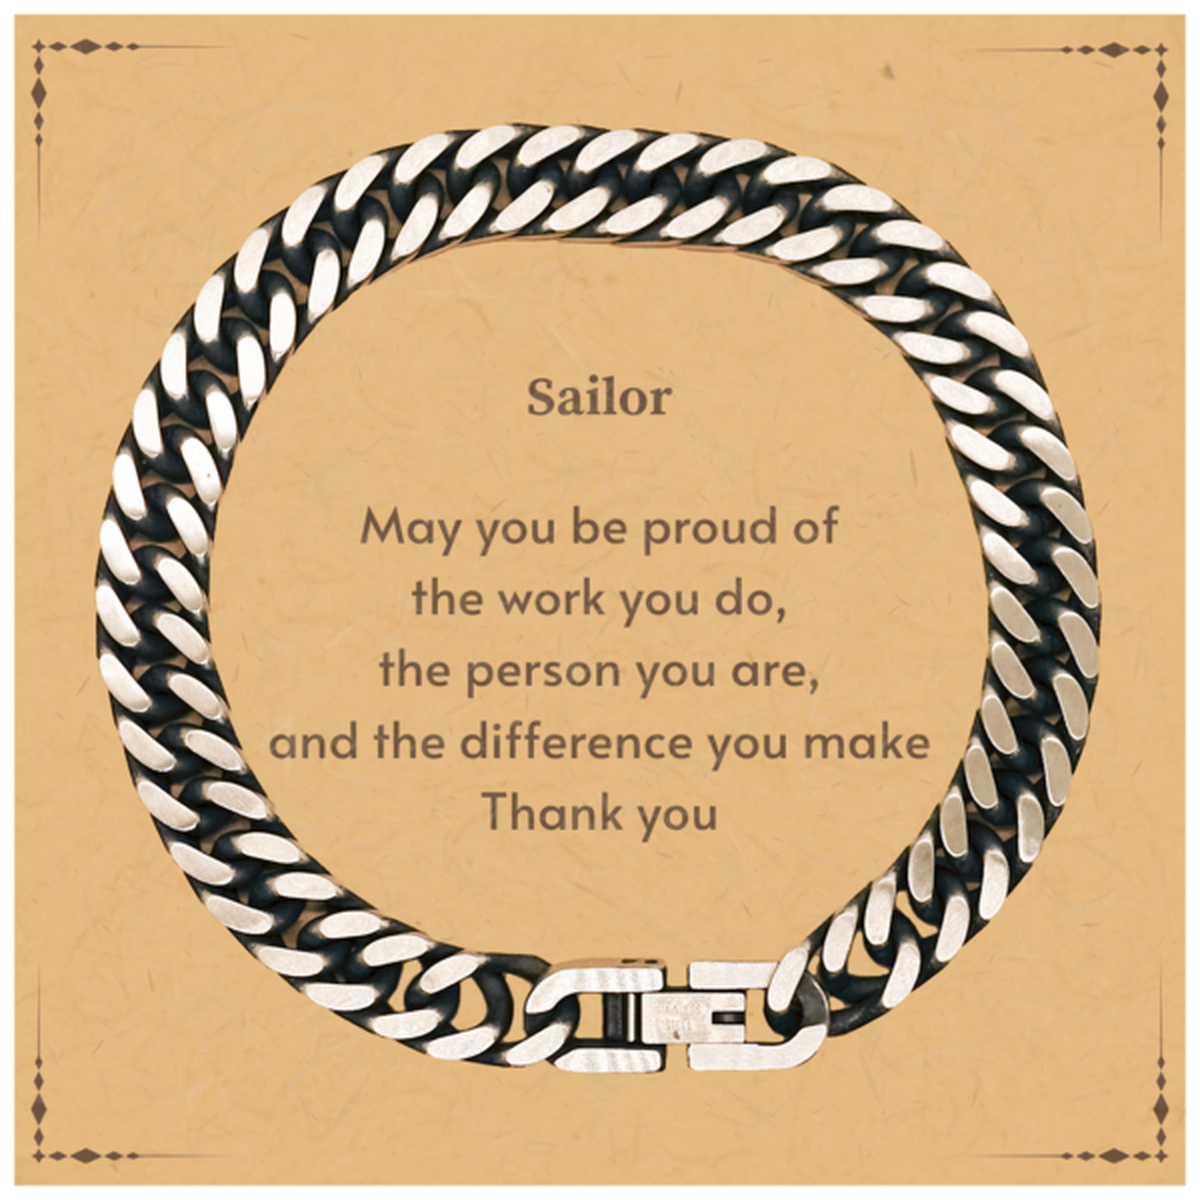 Heartwarming Cuban Link Chain Bracelet Retirement Coworkers Gifts for Sailor, Sailor May You be proud of the work you do, the person you are Gifts for Boss Men Women Friends